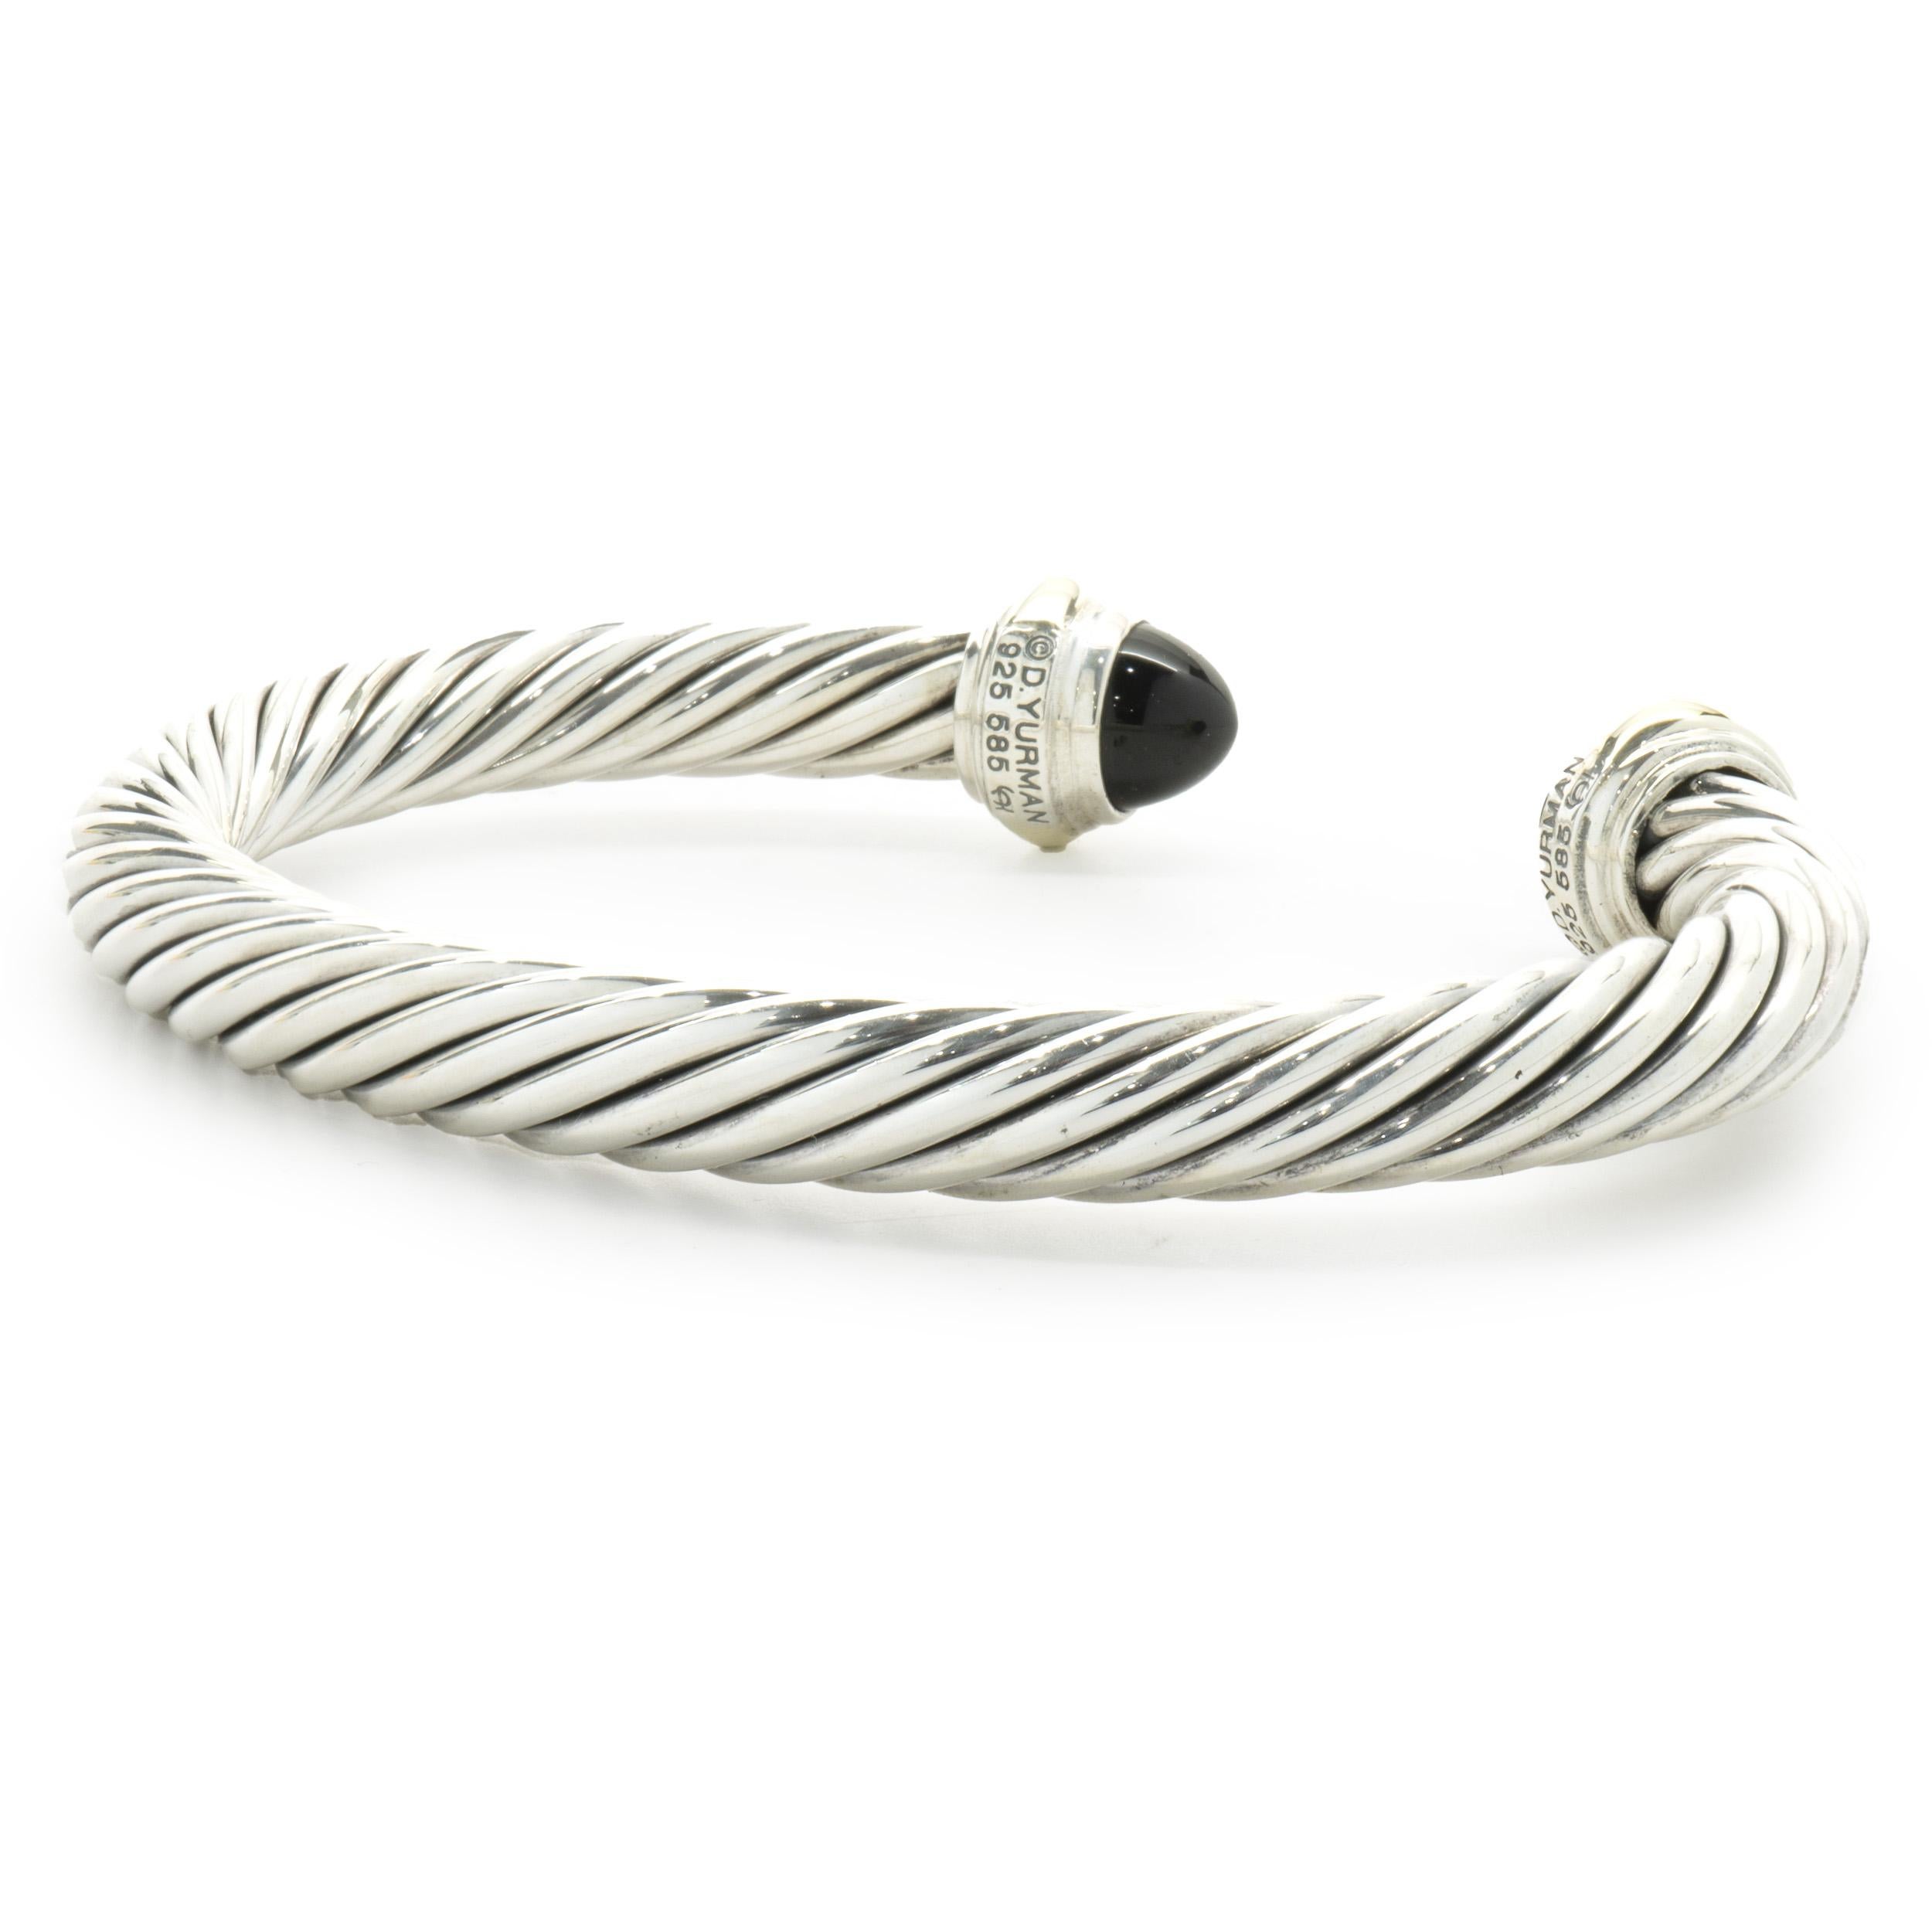 Designer: David Yurman
Material: sterling silver / 14K yellow gold
Dimensions: bracelet will fit a 7-inch wrist

No box or papers included
Guaranteed authentic by seller